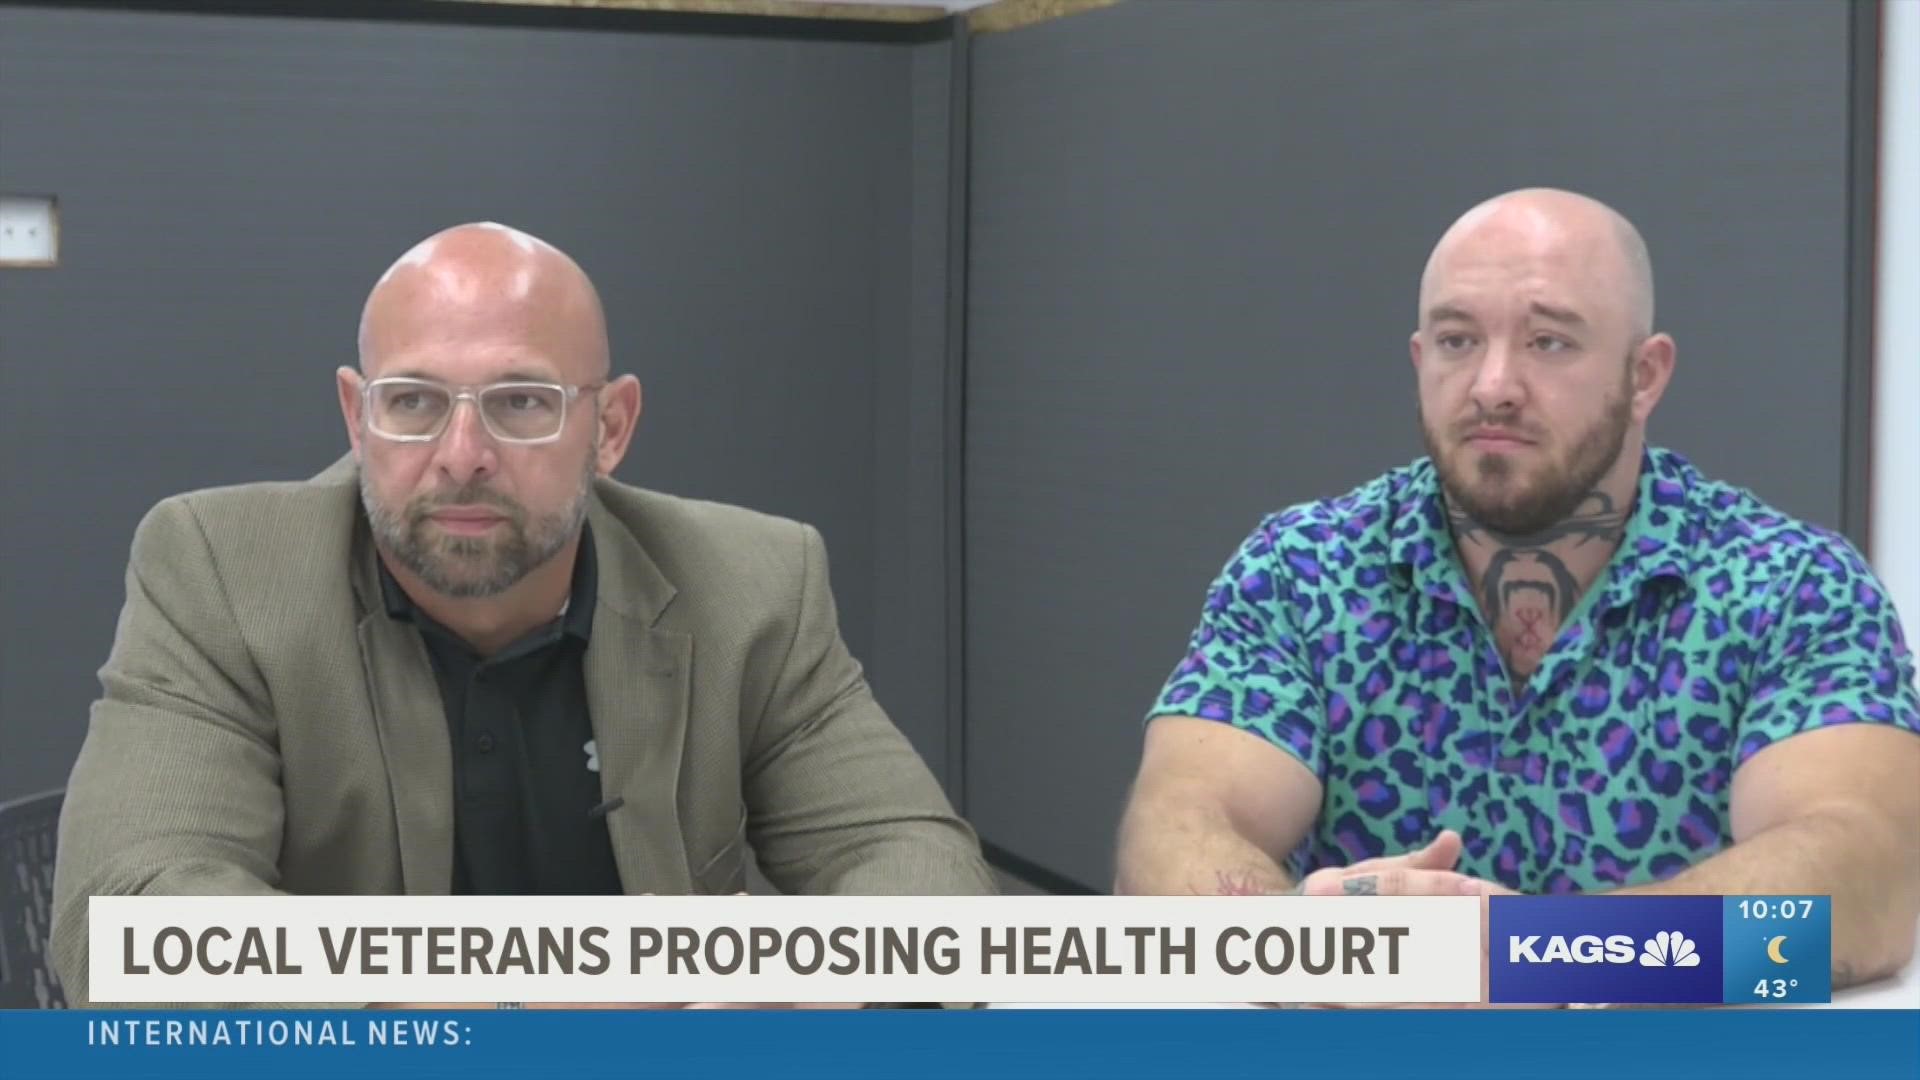 Patrick Baca and Lonnie Masterson say they have both served their country, and have both struggled to get accurate care in the past.